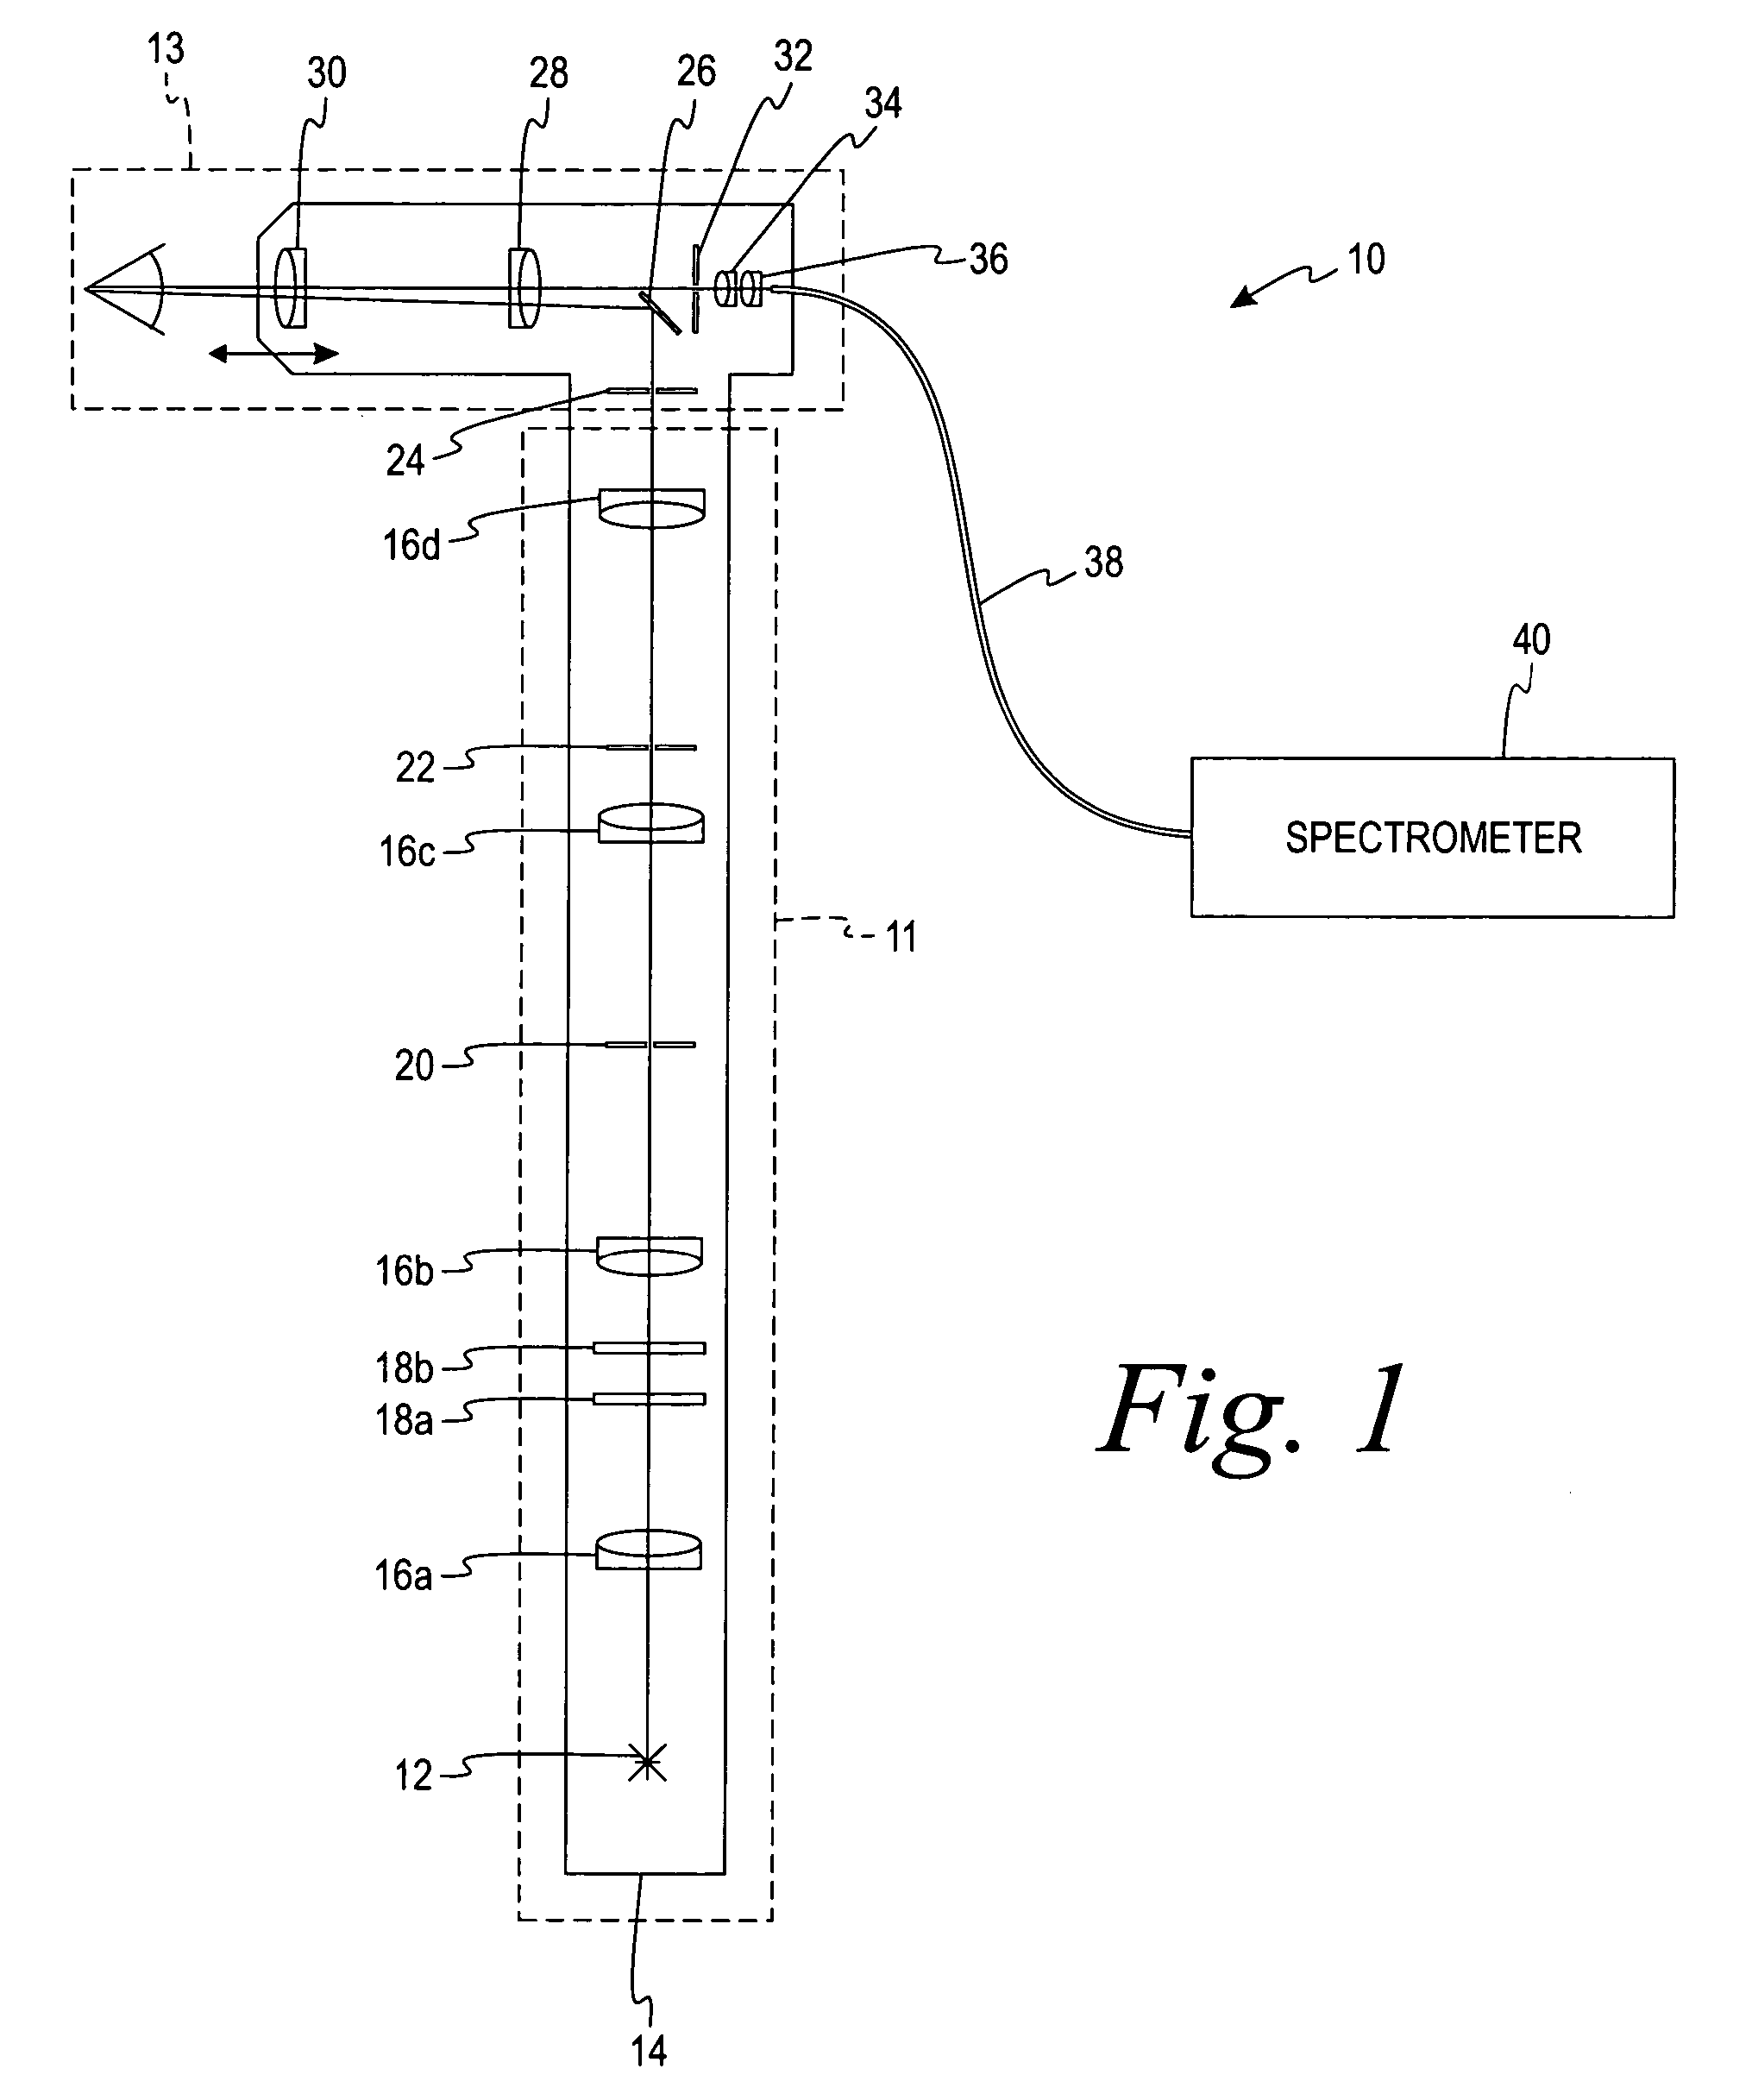 Reflectometry instrument and method for measuring macular pigment